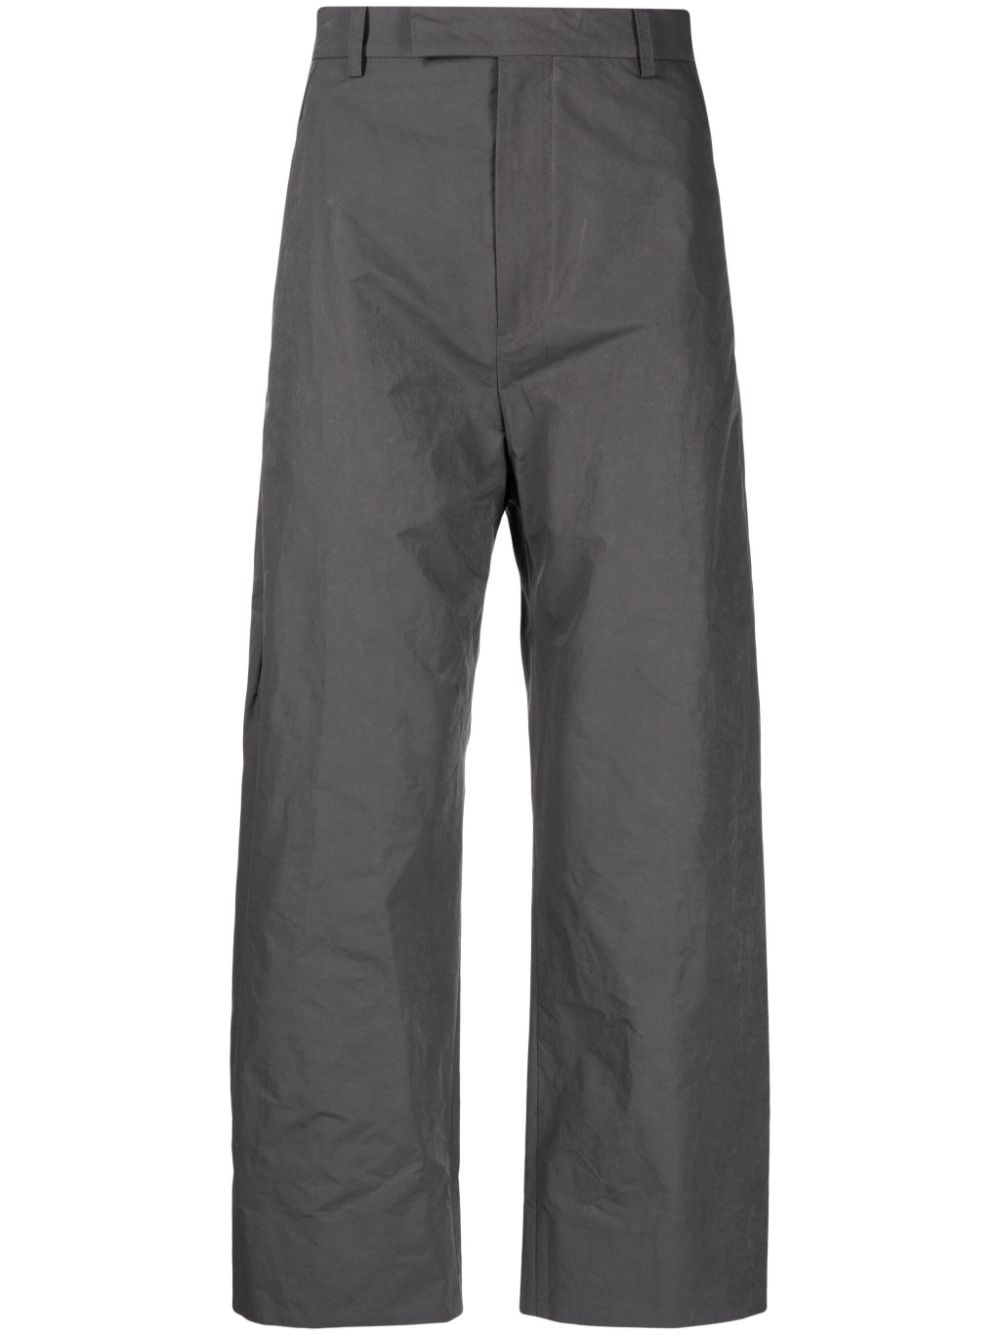 Image 1 of Craig Green high-waist tailored trousers